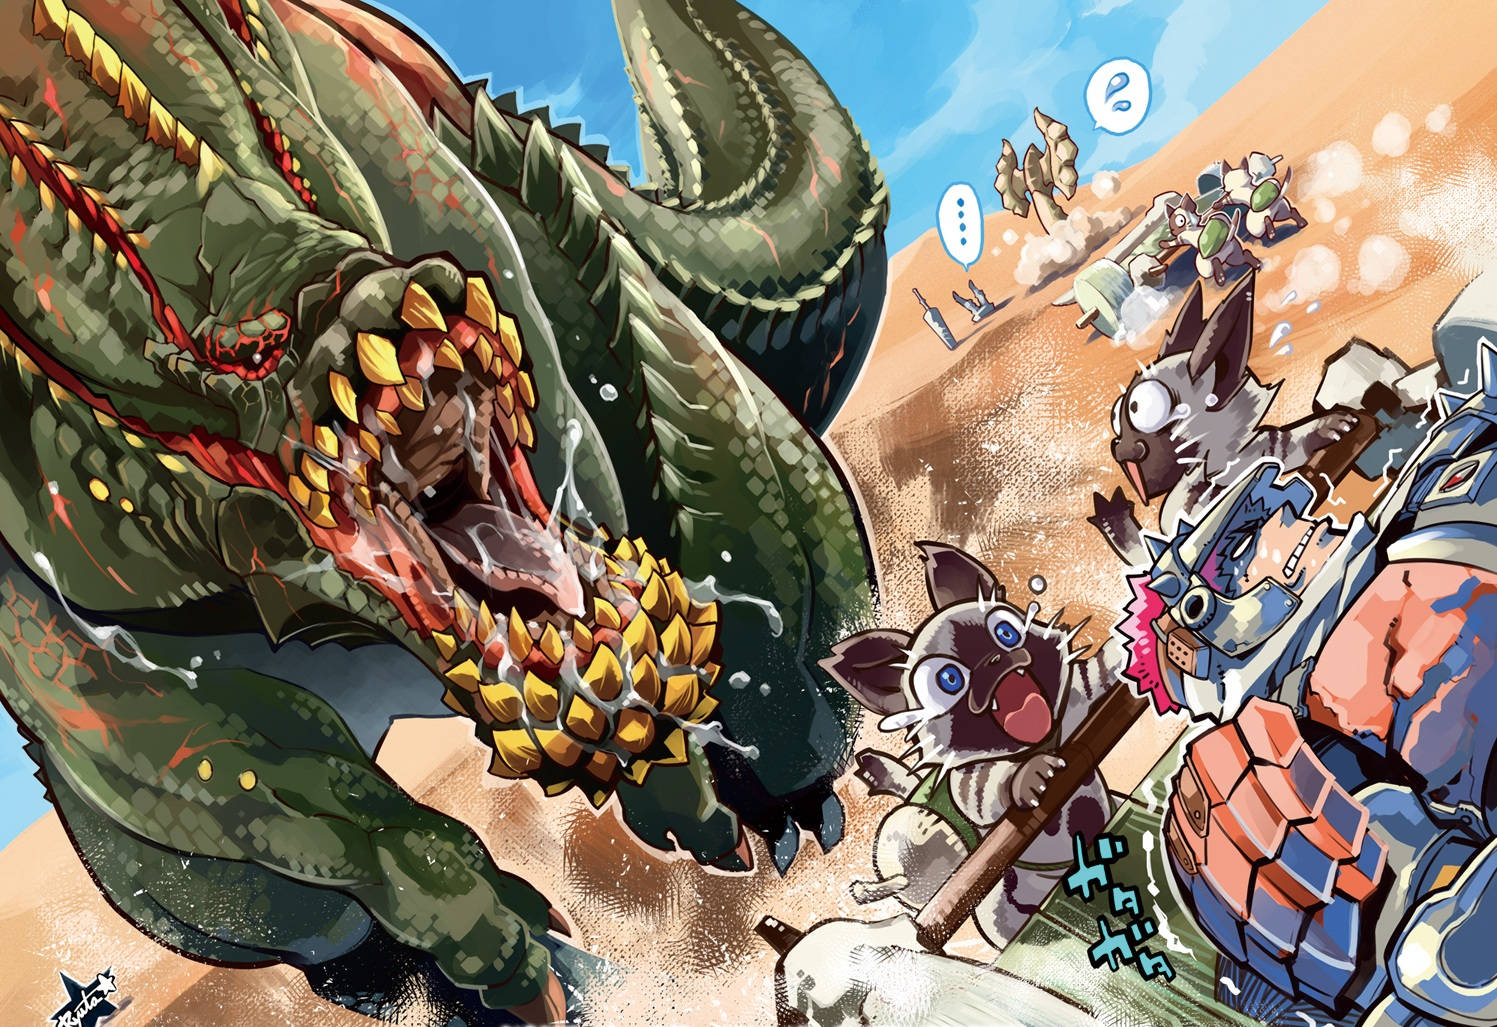 Unlock your inner warrior and go on an adventure with Monster Hunter! Wallpaper